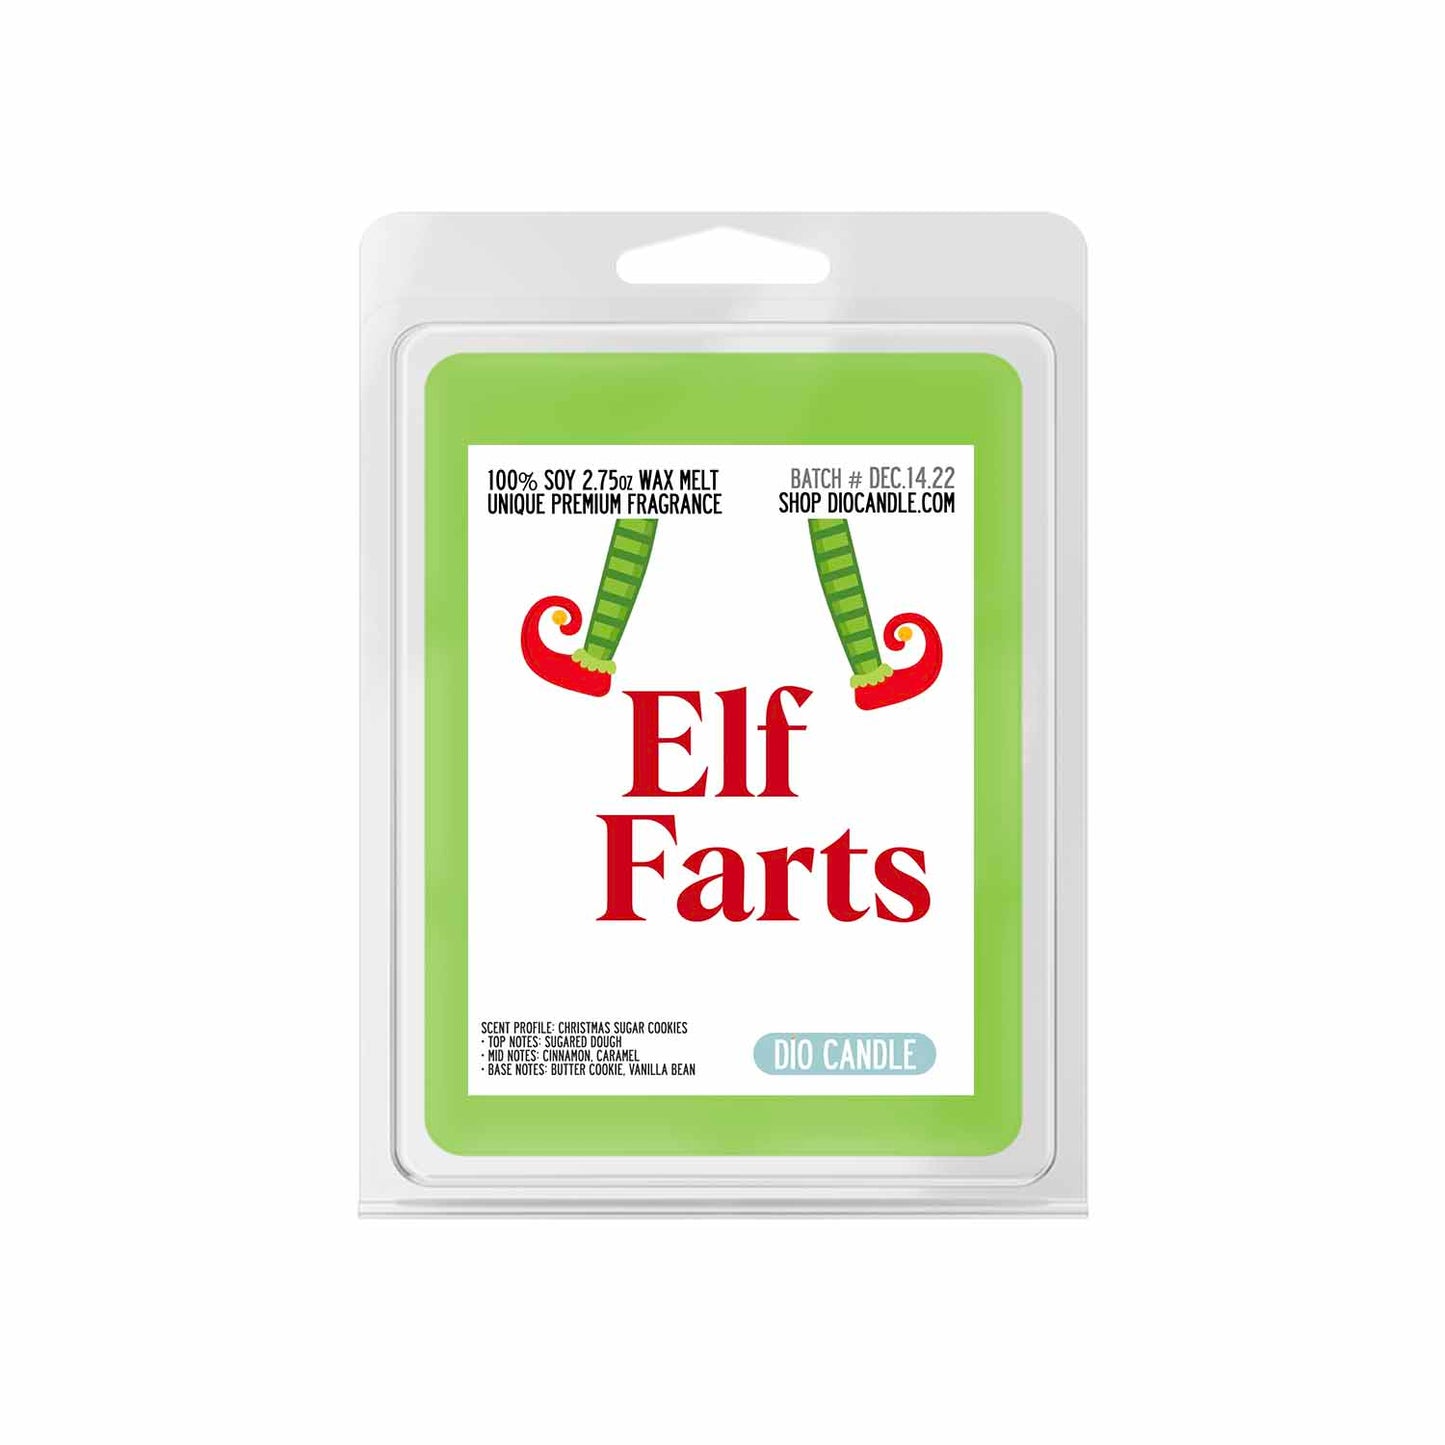 Santa Farts, Christmas Cookie Scented Wax Melts